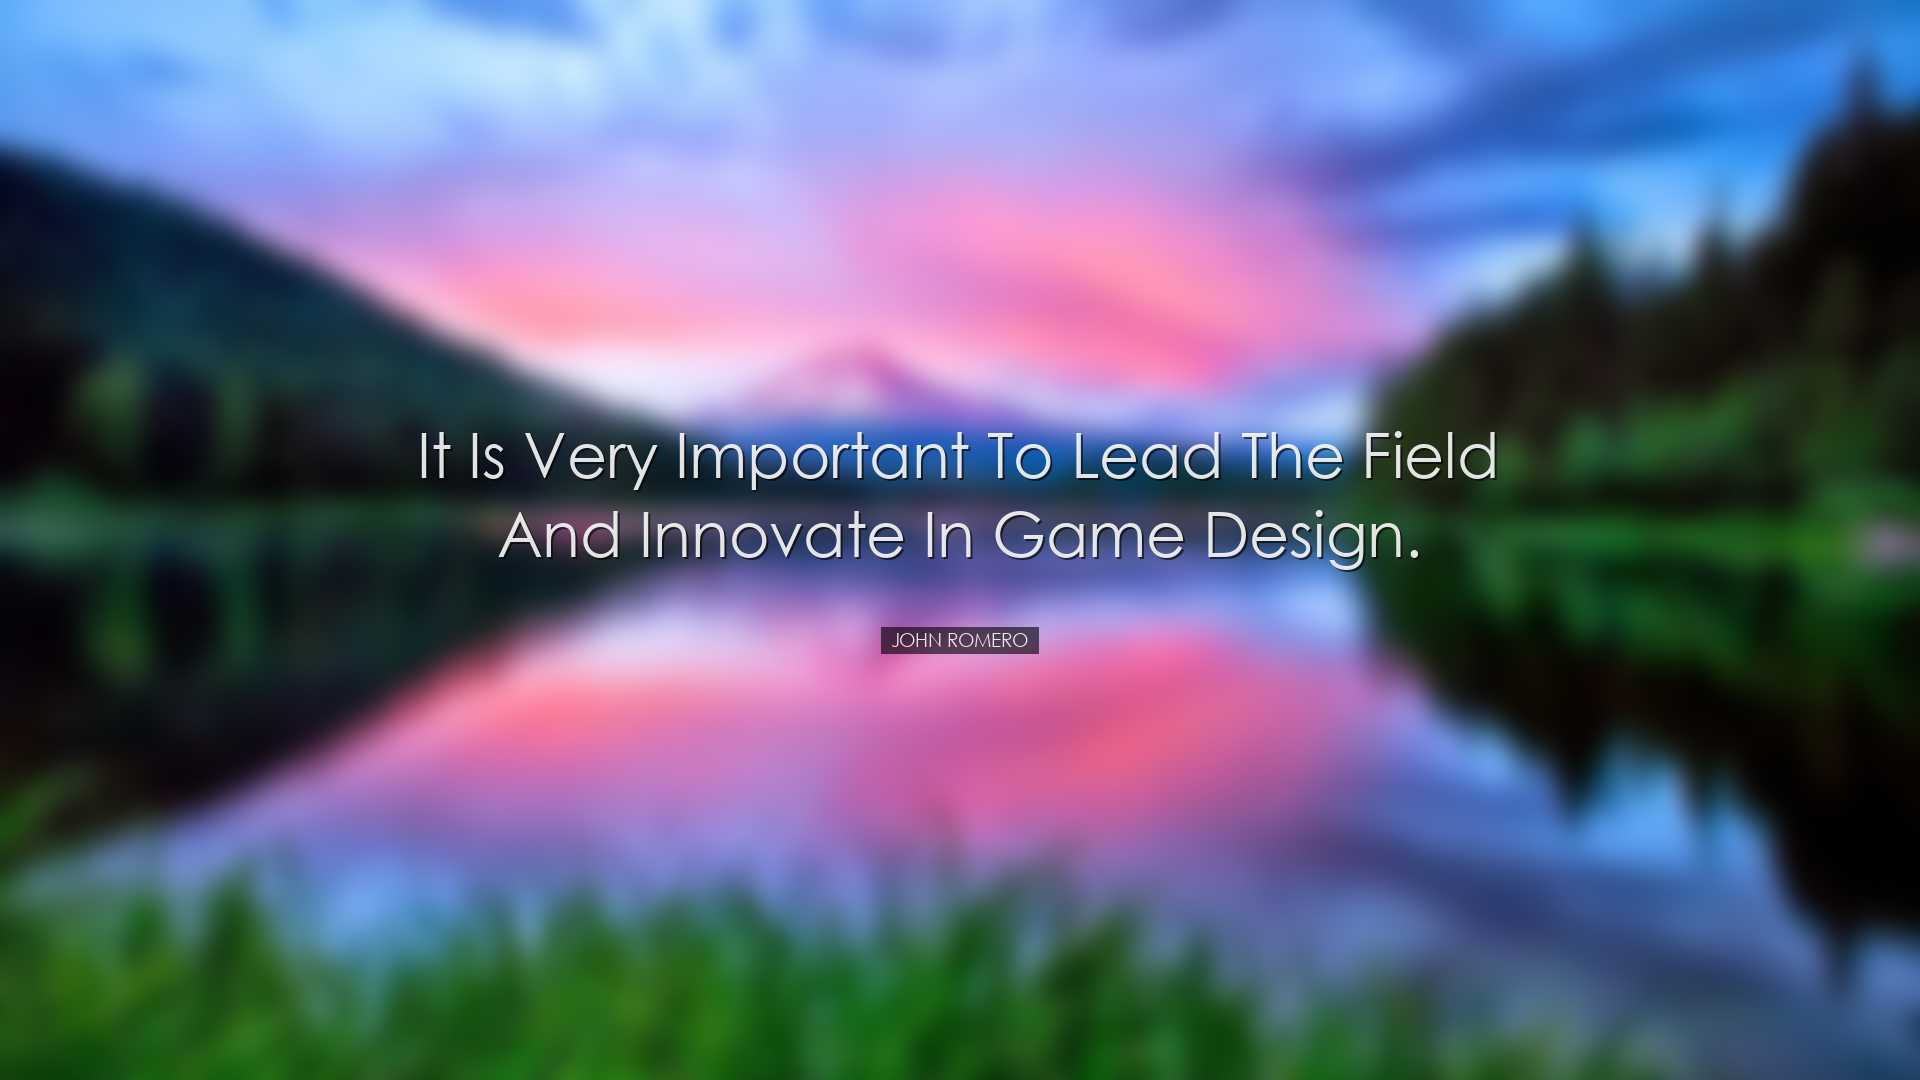 It is very important to lead the field and innovate in game design